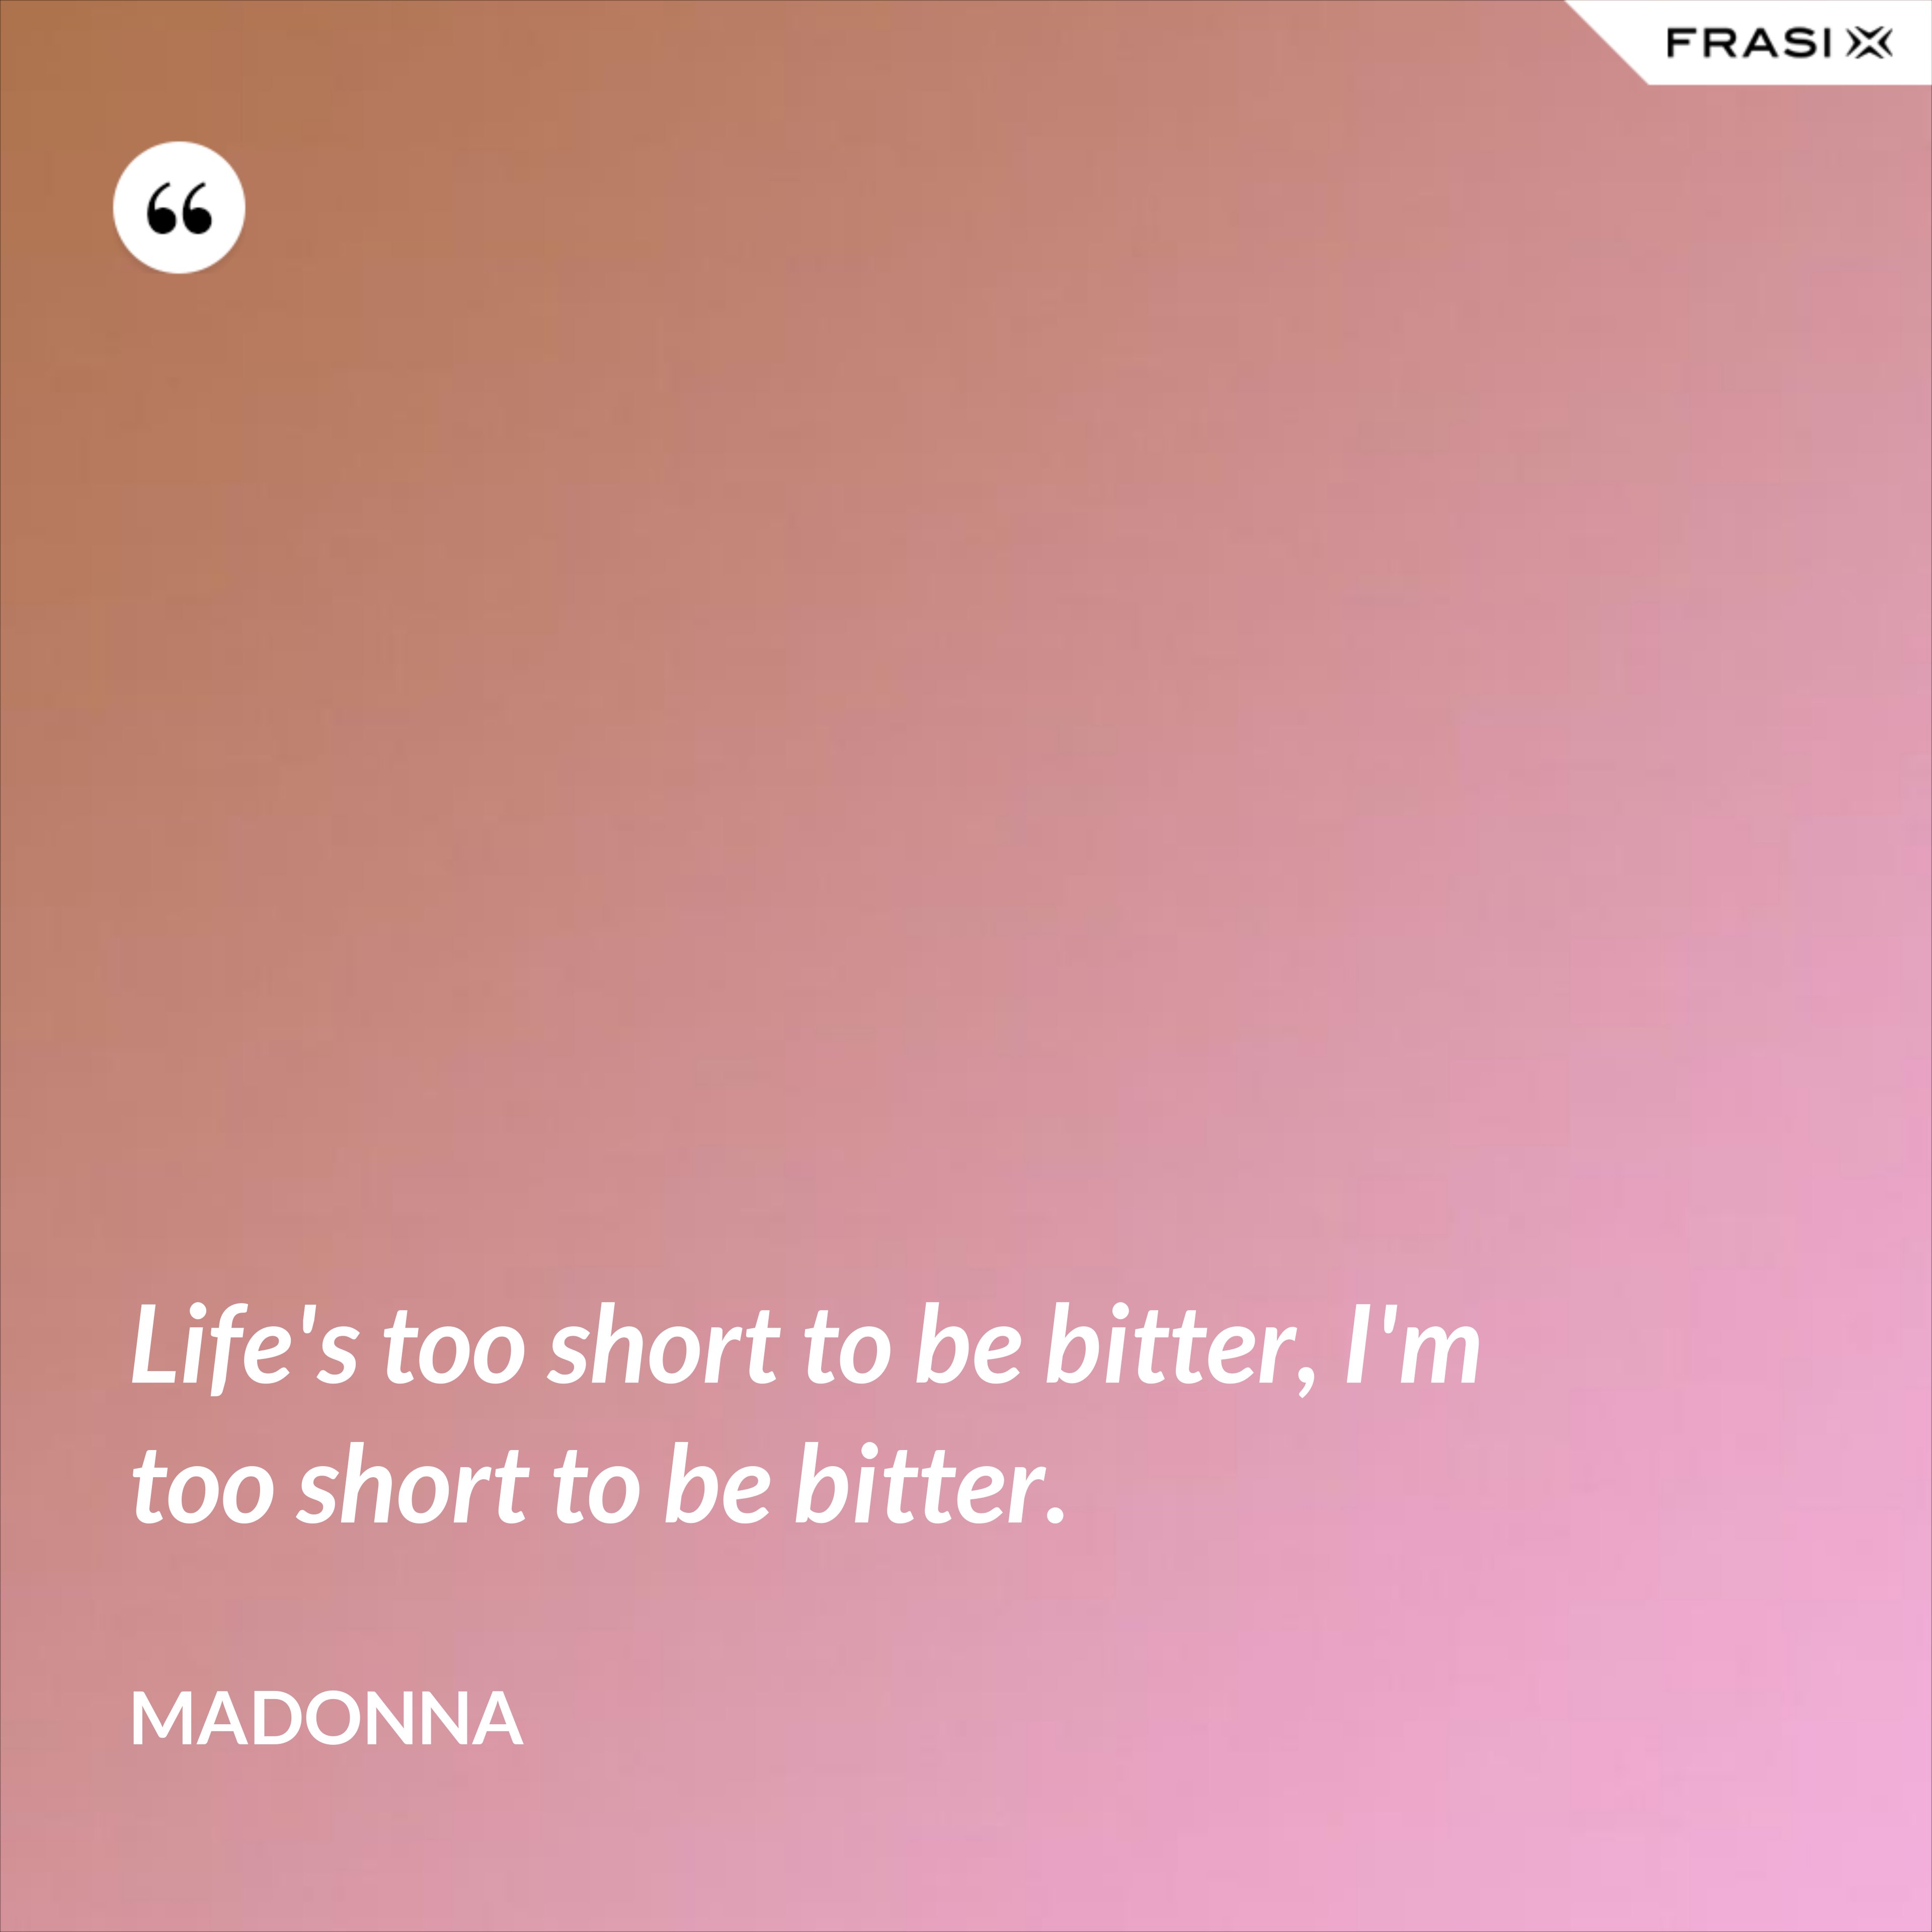 Life's too short to be bitter, I'm too short to be bitter. - Madonna